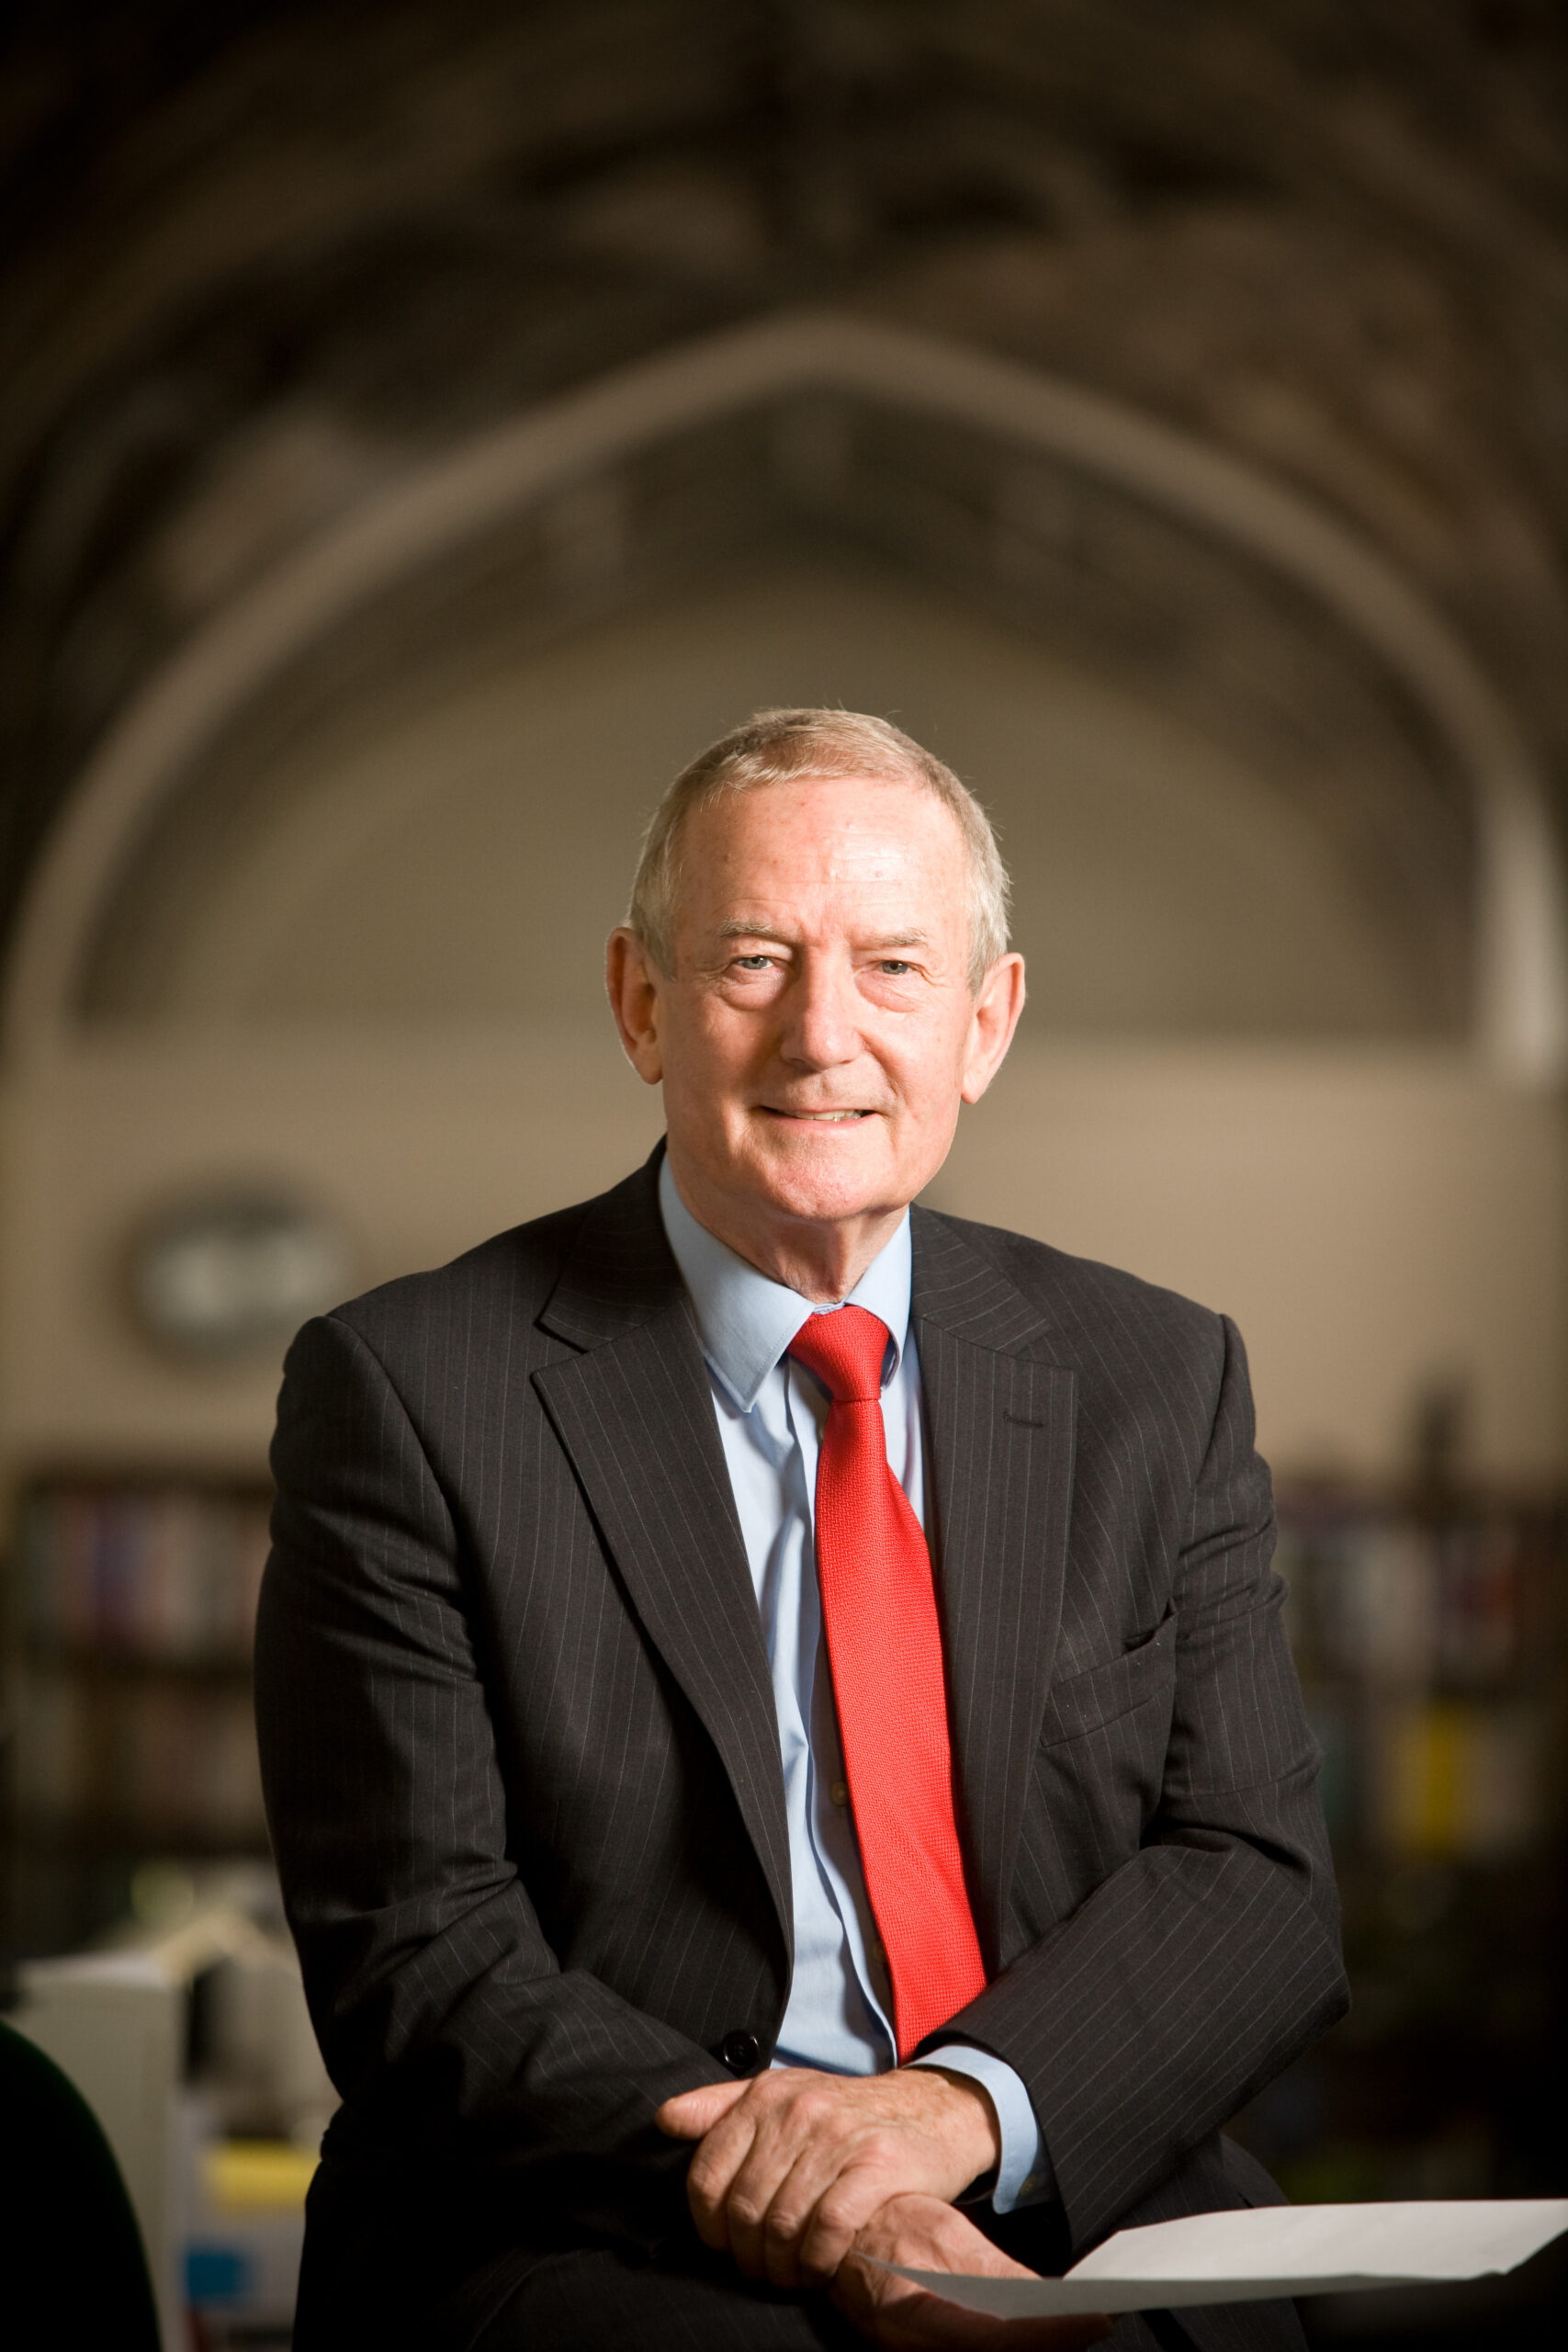 <strong>Barry Sheerman MP, Labour, Co-operative Member of Parliament for Huddersfield</strong>